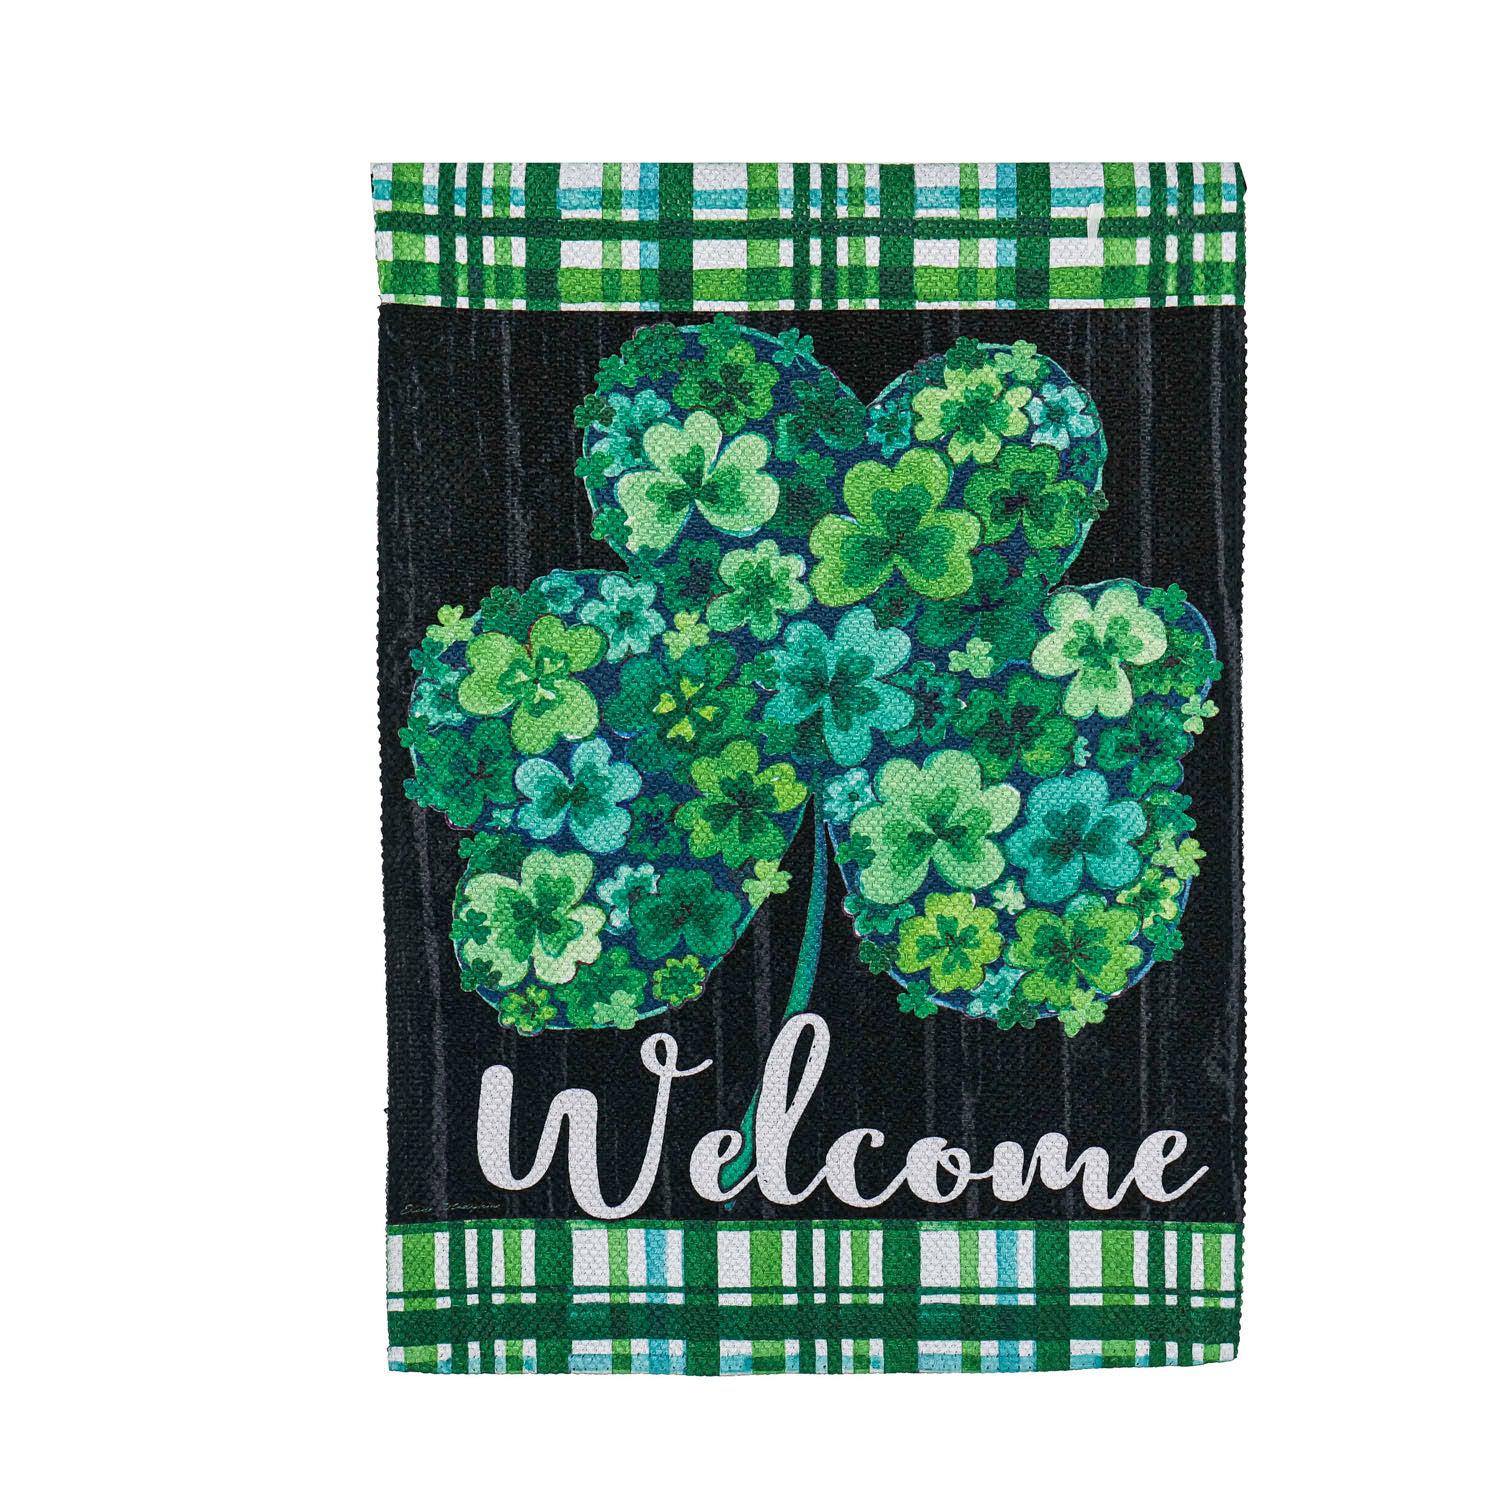 The Shamrock Flowers garden flag features a shamrock with a floral motif, plaid accents, and the word "Welcome". 